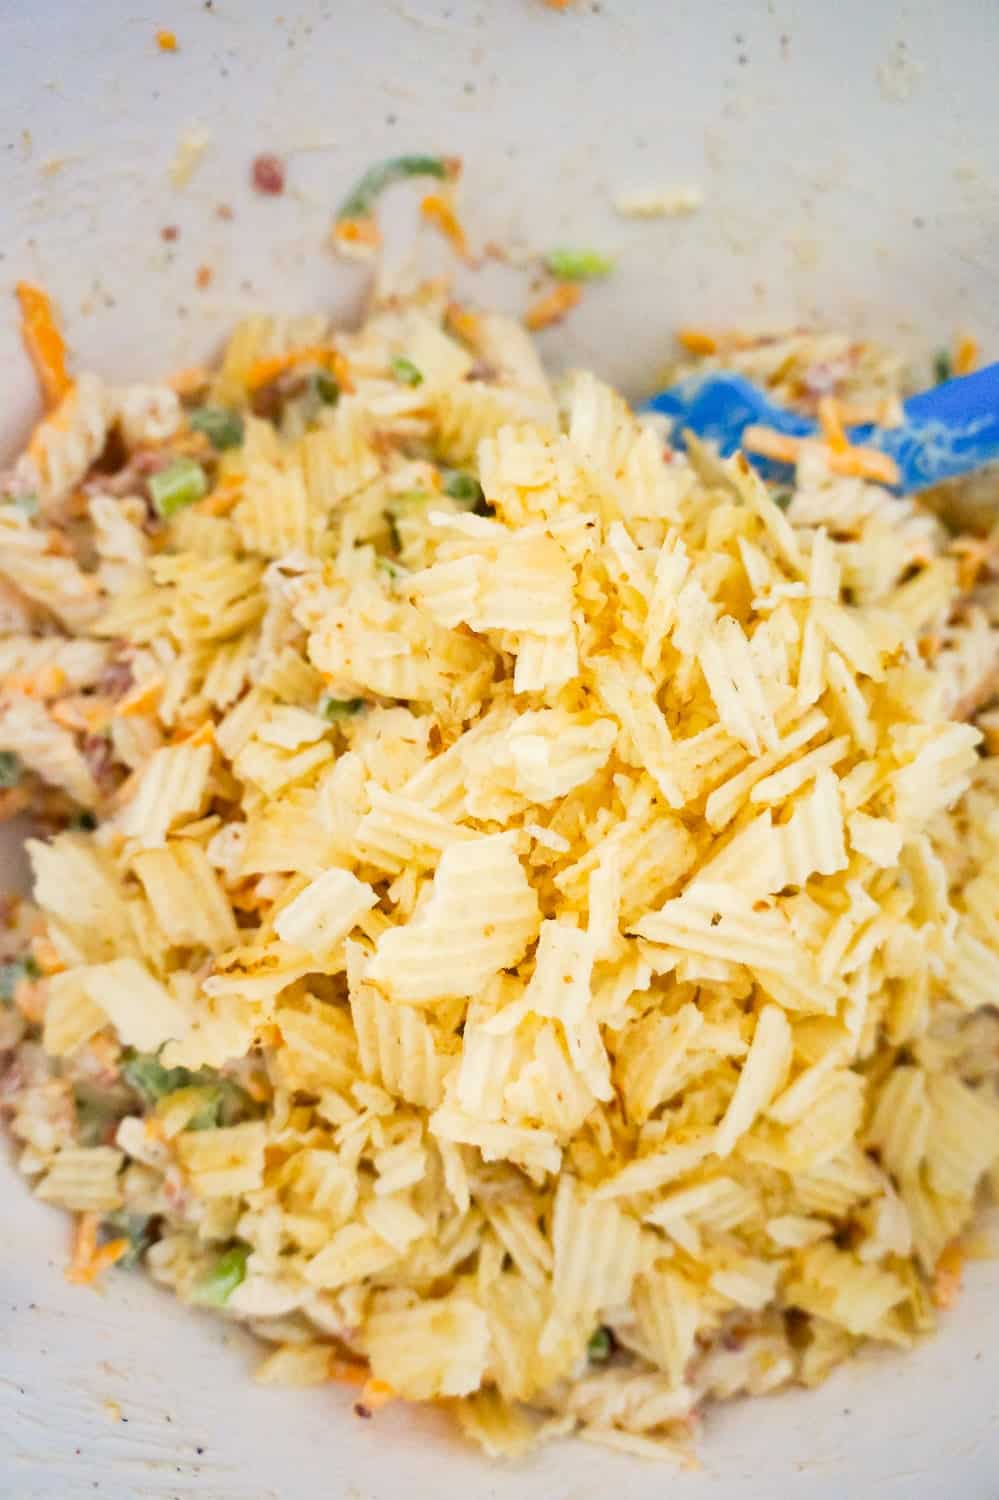 crumbled potato chips on top of pasta salad in a mixing bowl